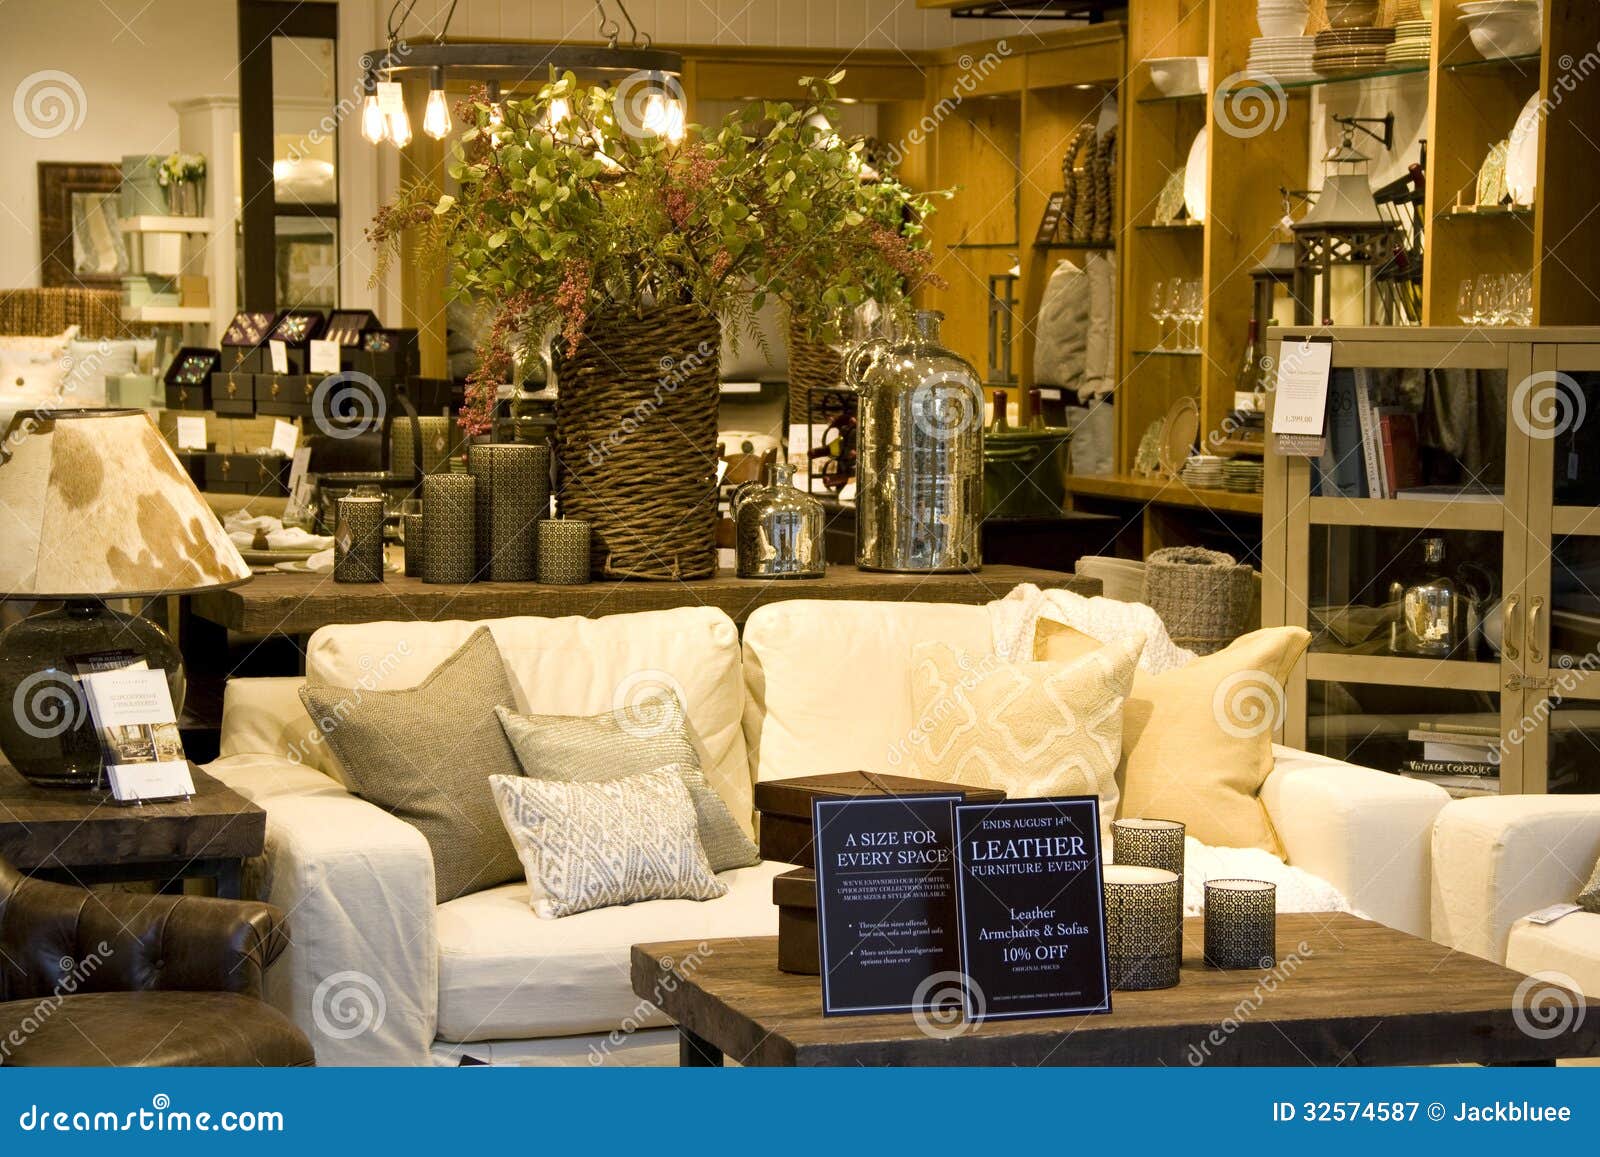 Furniture Home Decor Store Editorial Photography - Image 